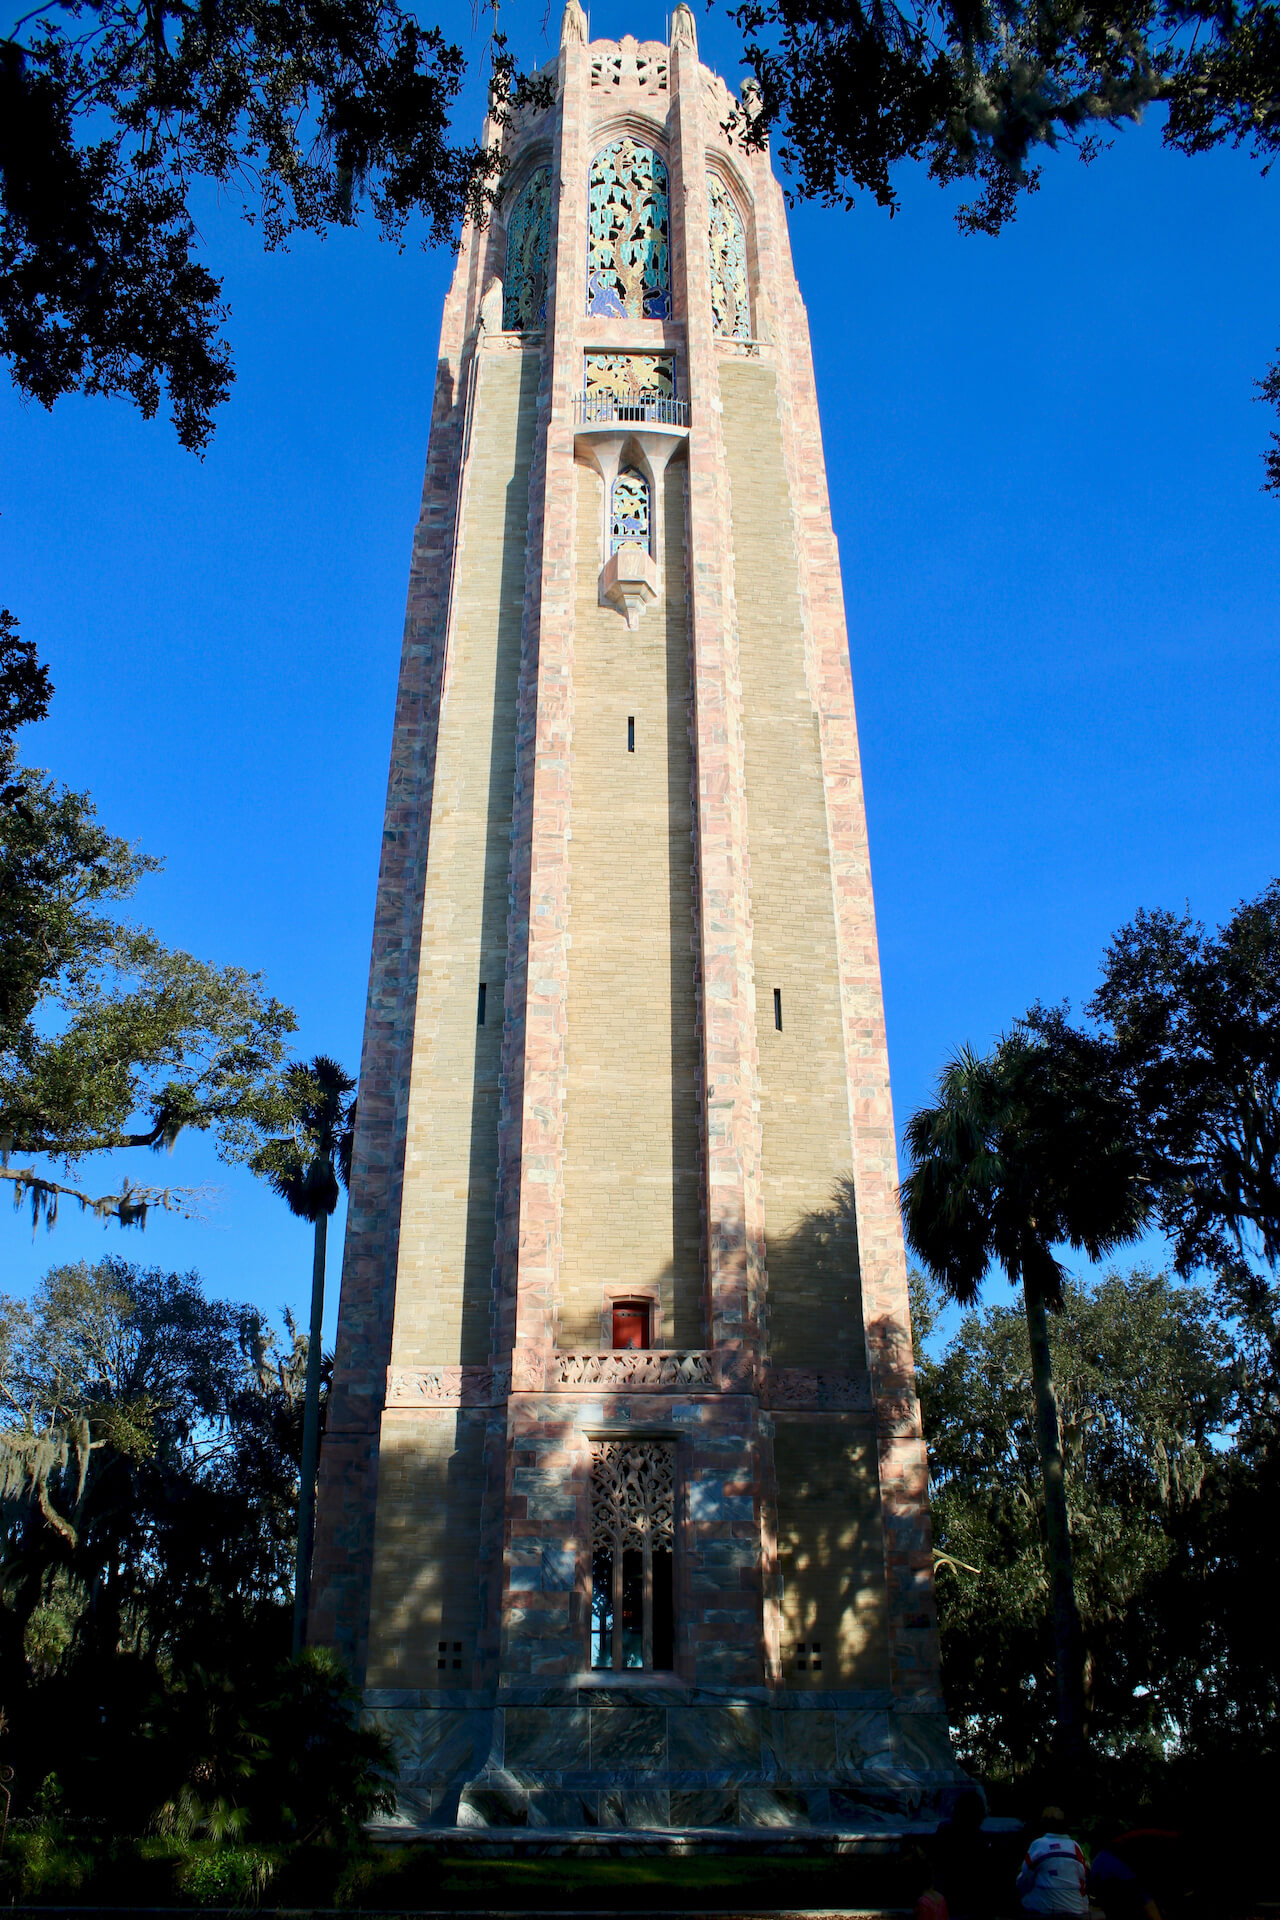 Carillon bell tower Bok Tower Gardens Lake Wales, Florida. Explore 50 acres of meandering pathways and gardens, listen to the beautiful bells of the Singing Tower carillon, and stroll through a Mediterranean-style mansion. Must Do Visitor Guides | MustDo.com